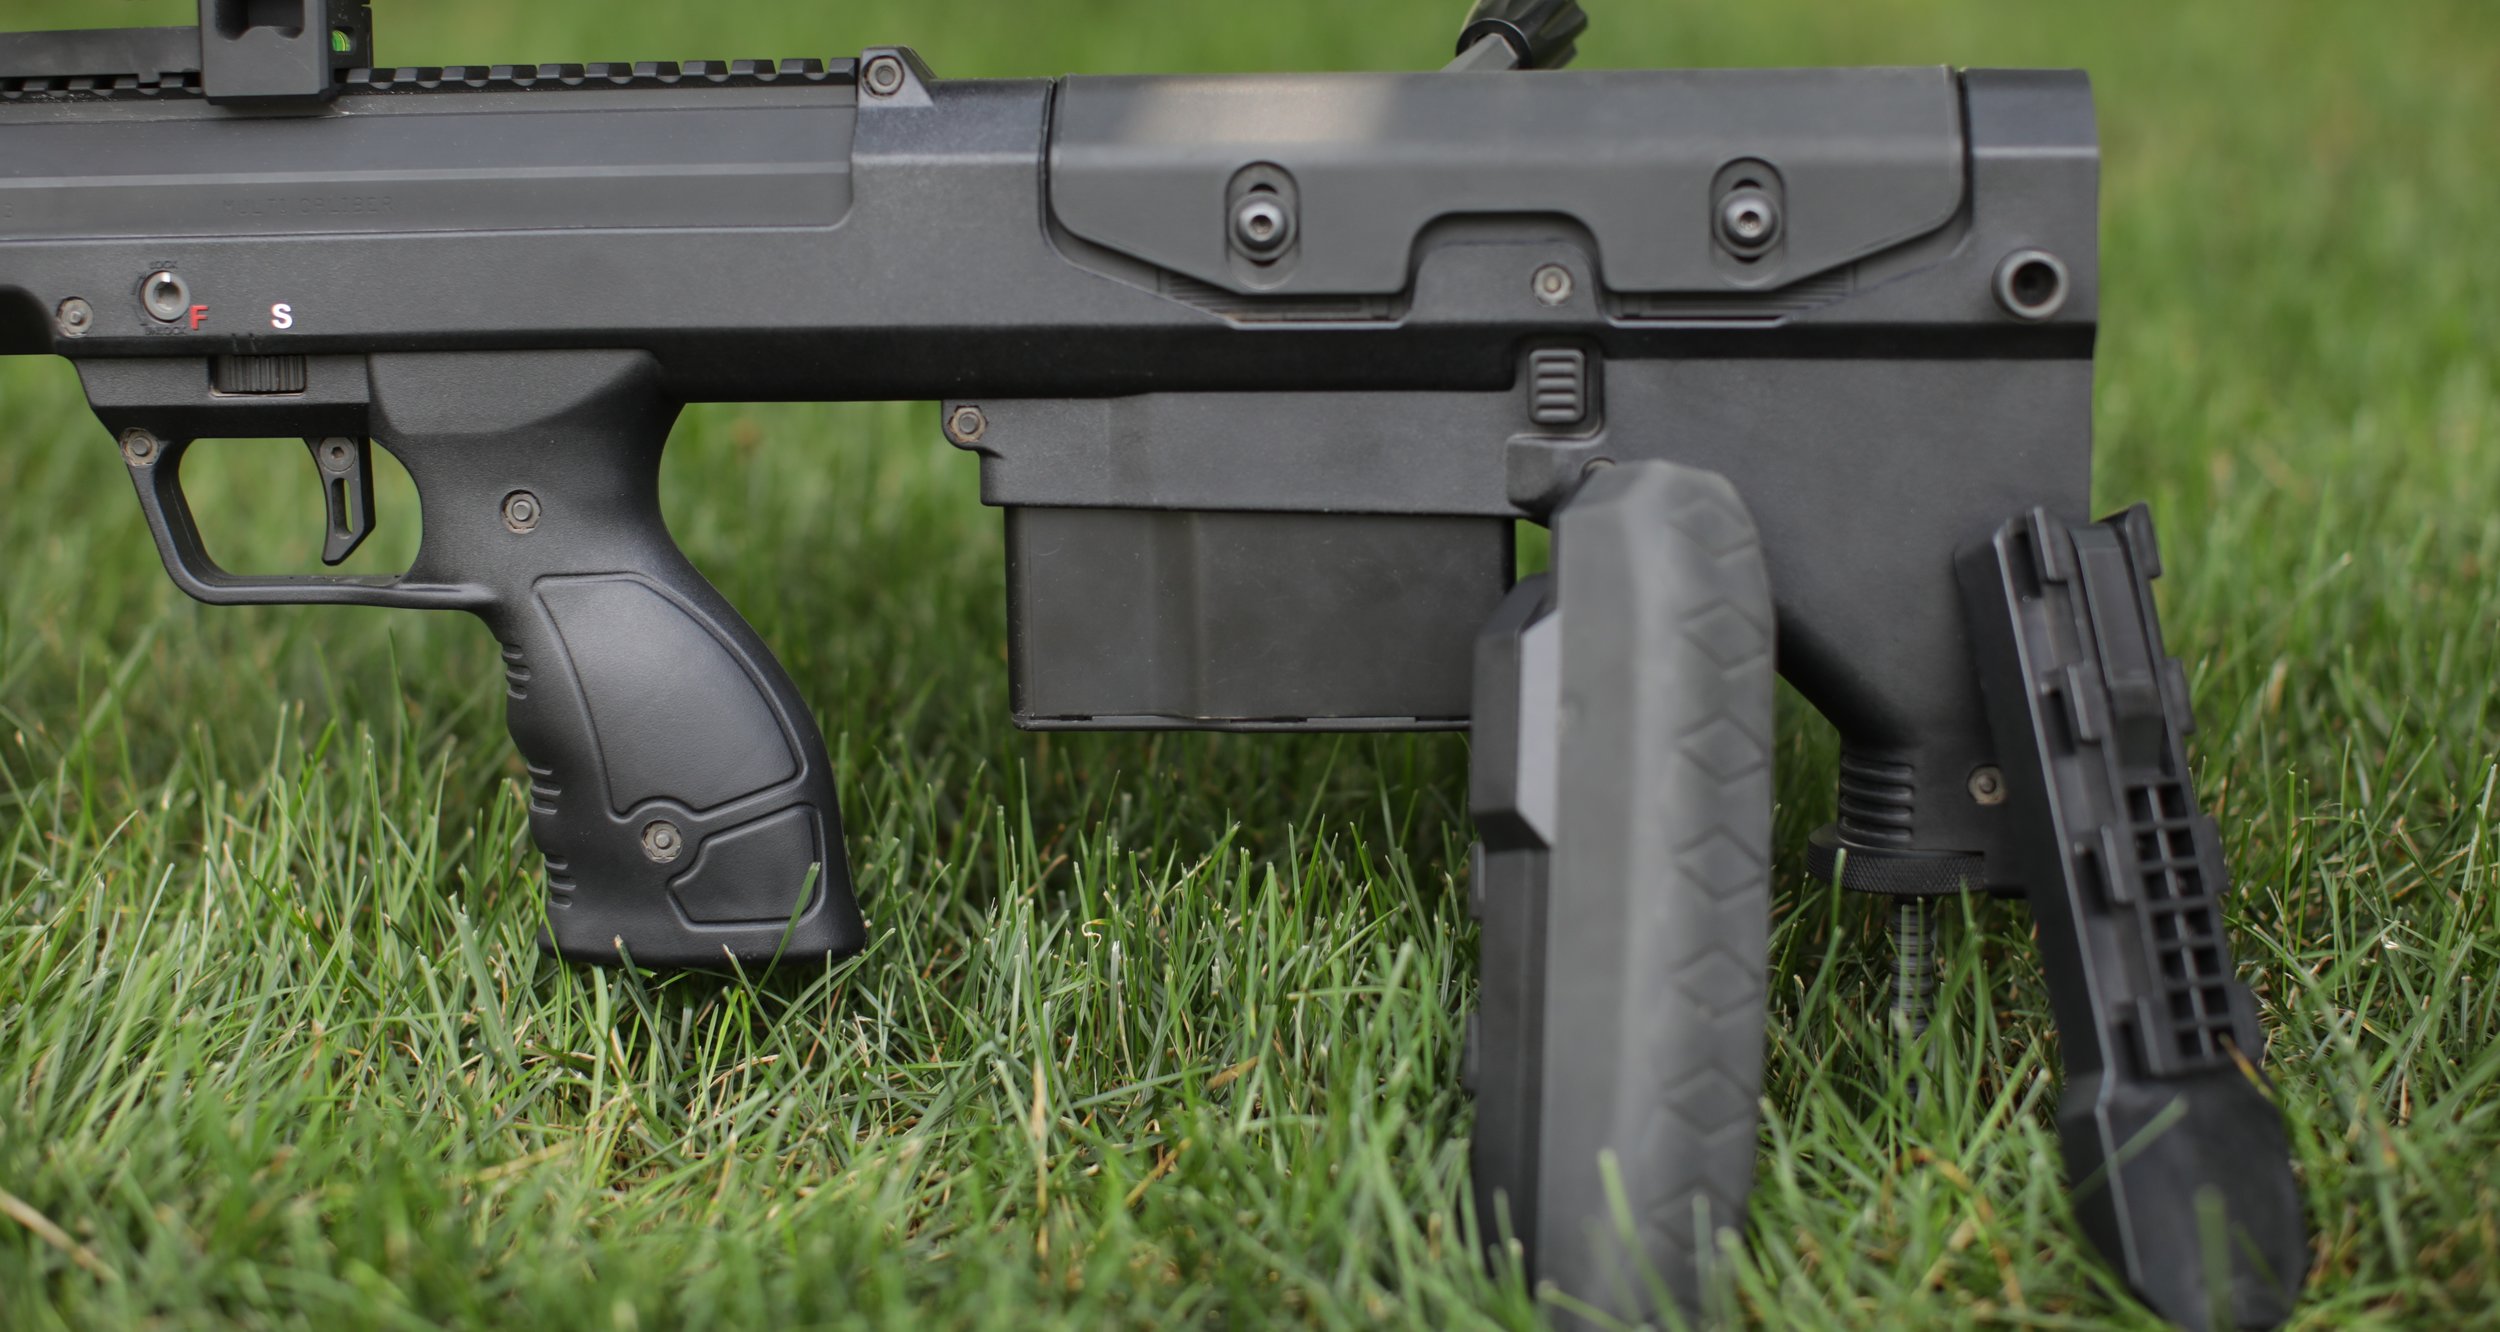 Shims and a great recoil pad make shooting from any position a breeze.